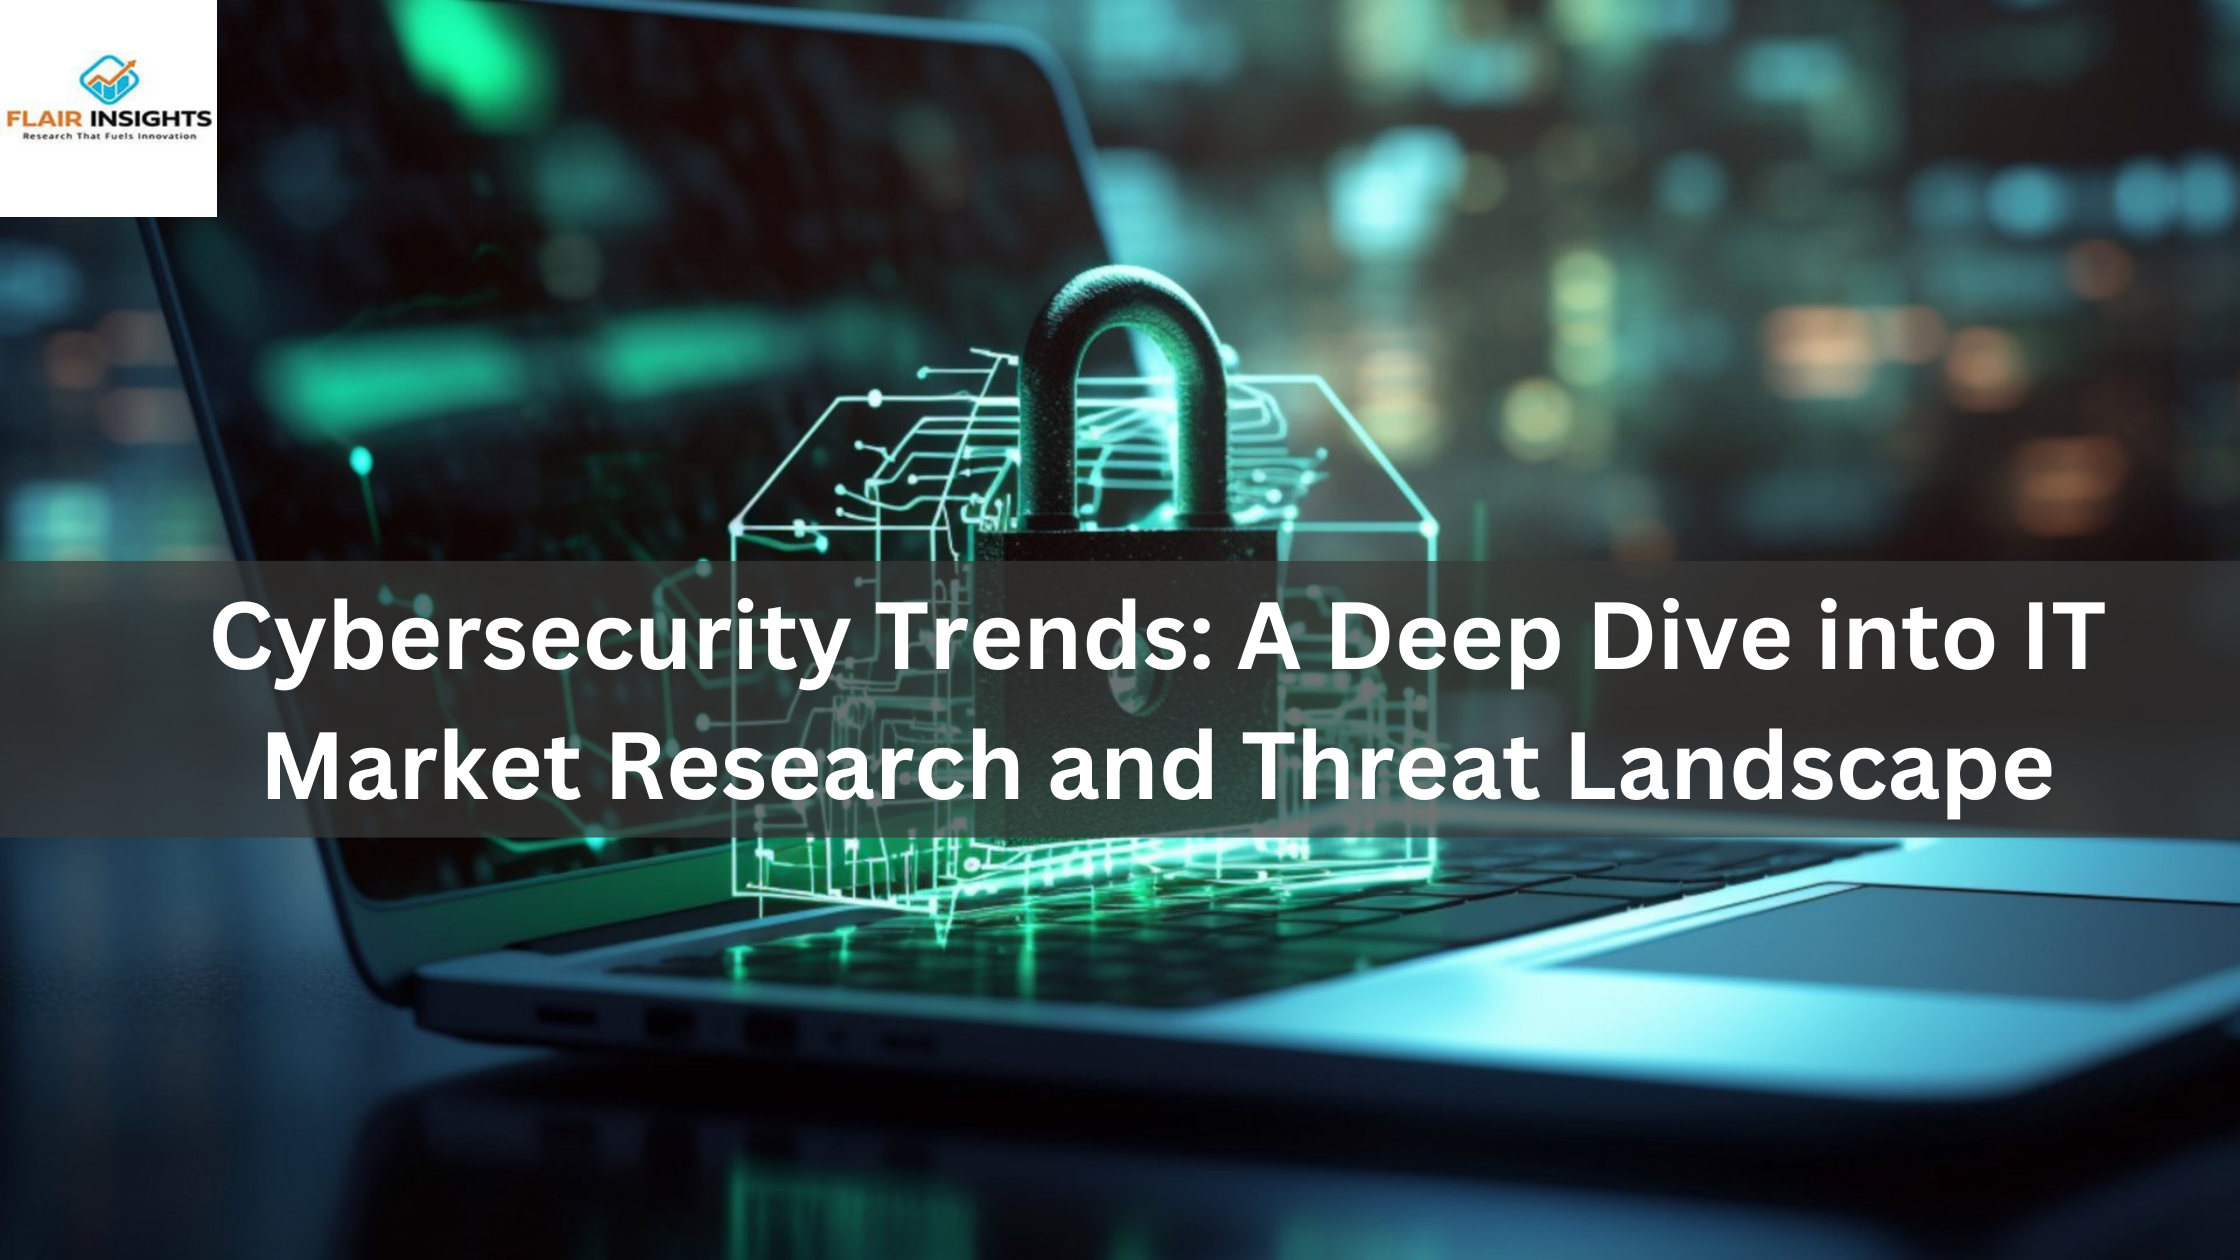 Cybersecurity Trends: A Deep Dive into IT Market Research and Threat Landscape